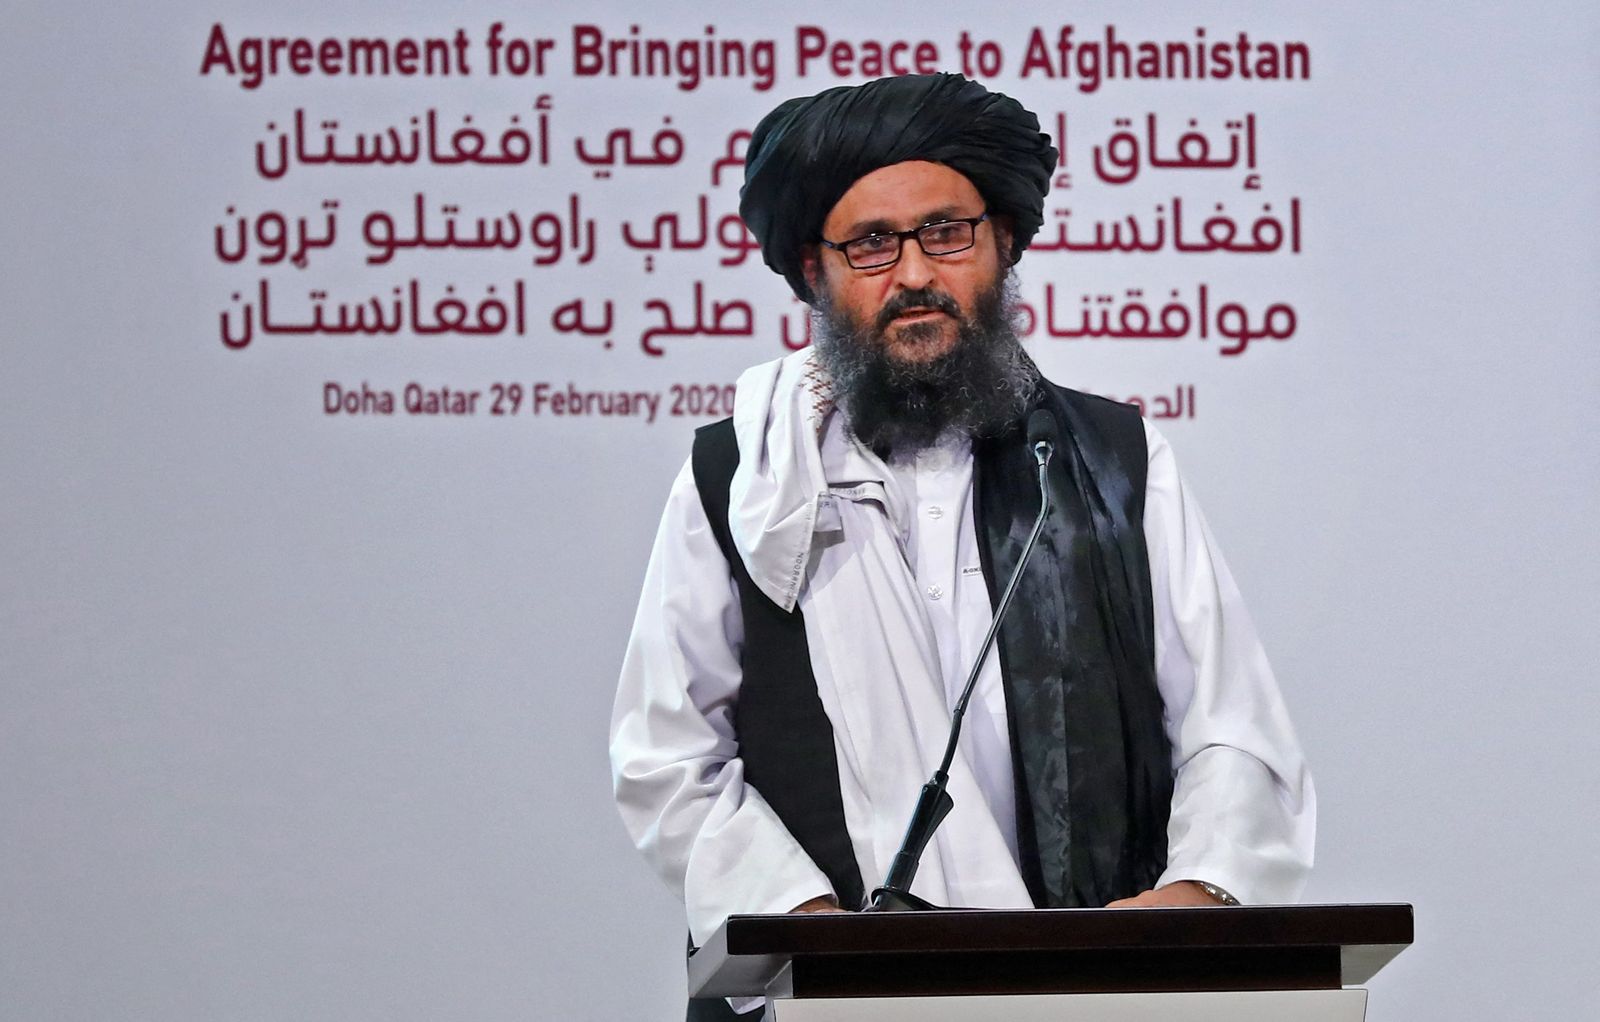 (FILES) In this file photo taken on February 29, 2020 Taliban co-founder Mullah Abdul Ghani Baradar speaks at a signing ceremony of the US-Taliban agreement in Qatar's capital Doha. - Taliban co-founder Mullah Abdul Ghani Baradar arrived in Kabul on August 21, 2021 for talks on establishing a new 